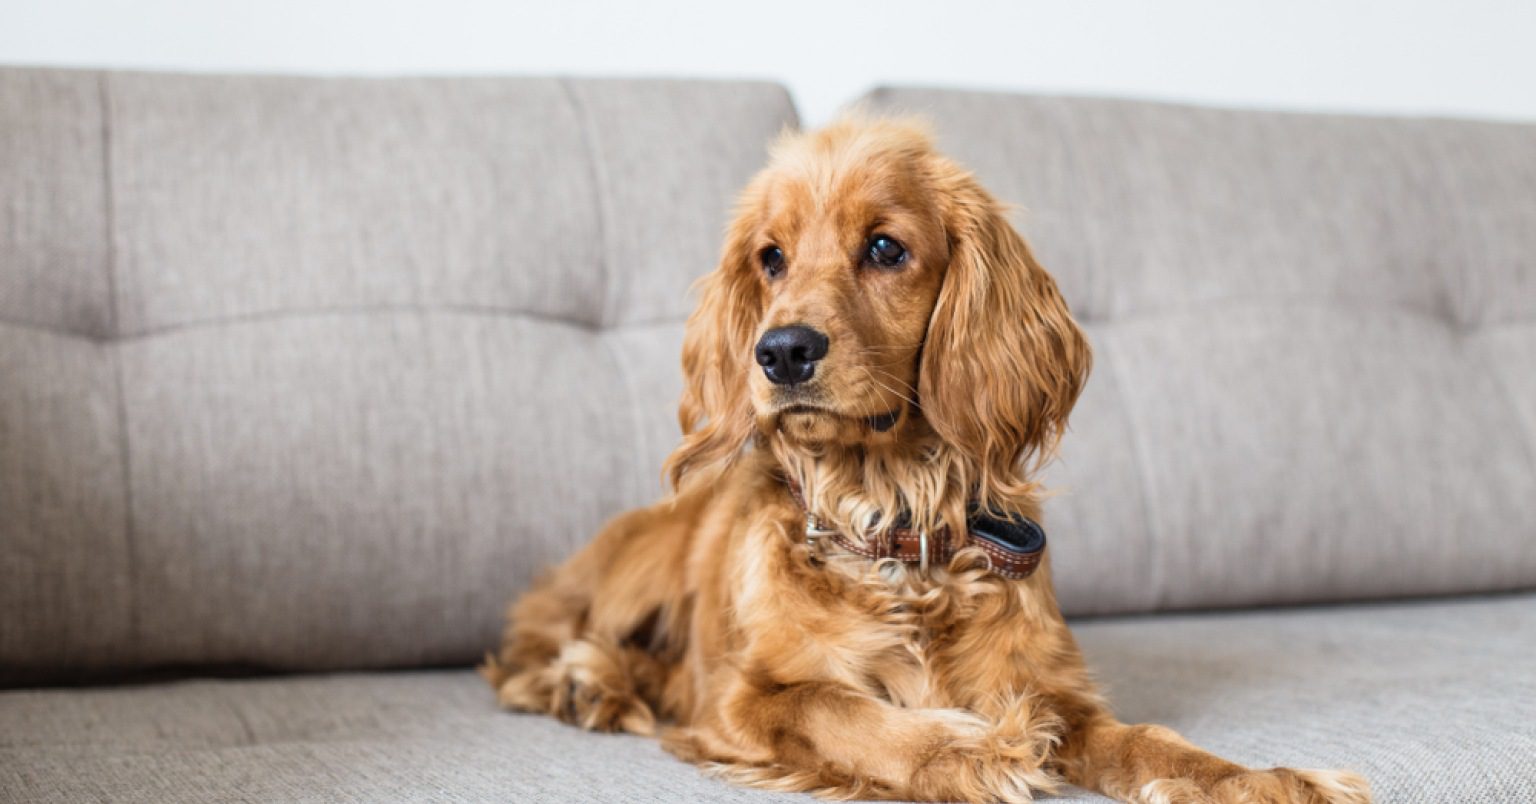 Photograph of a Cocker Spaniel on a gray couch